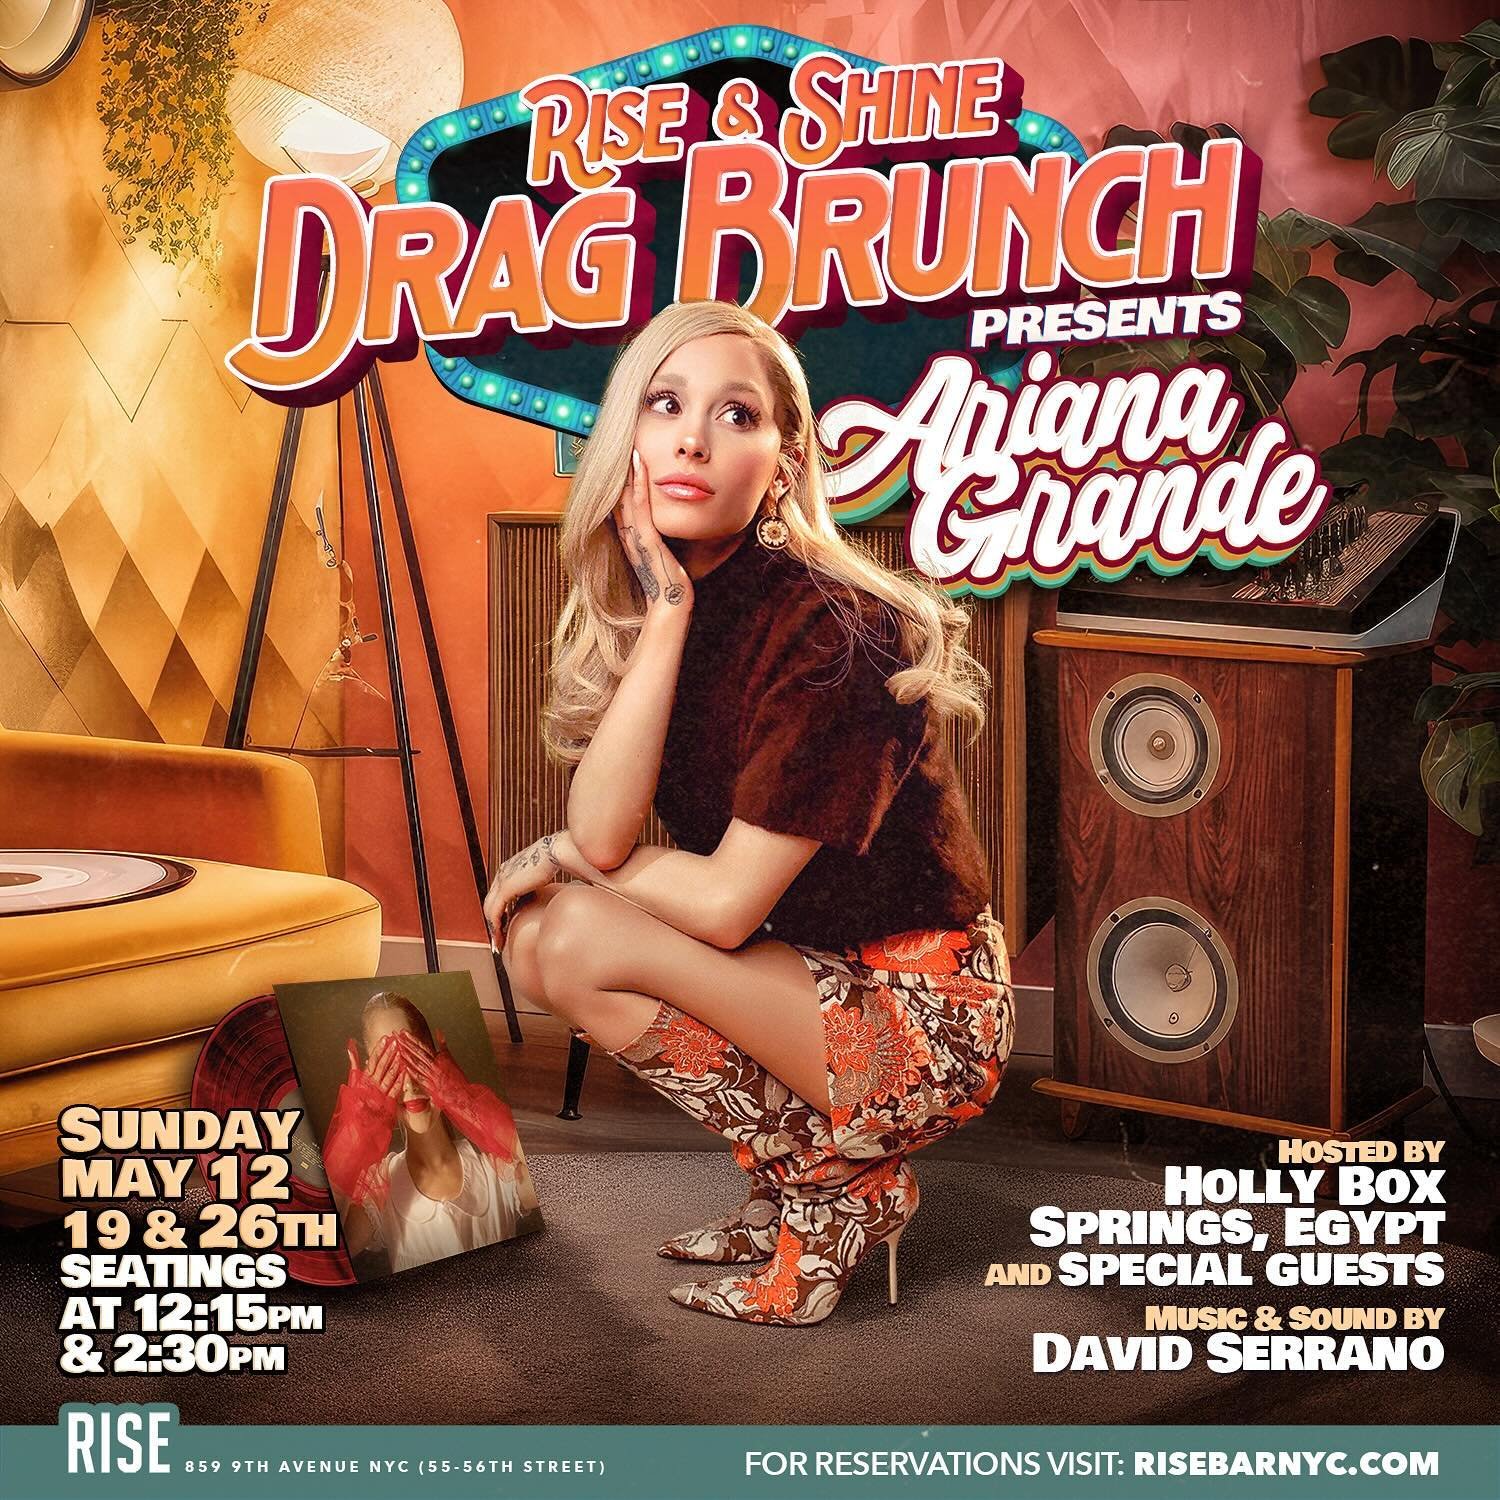 Sunday we are kicking off our Ariana Grande Drag Brunch at Rise! Get your reservations NOW in our bio! Seating at 12:15 and 2:30!